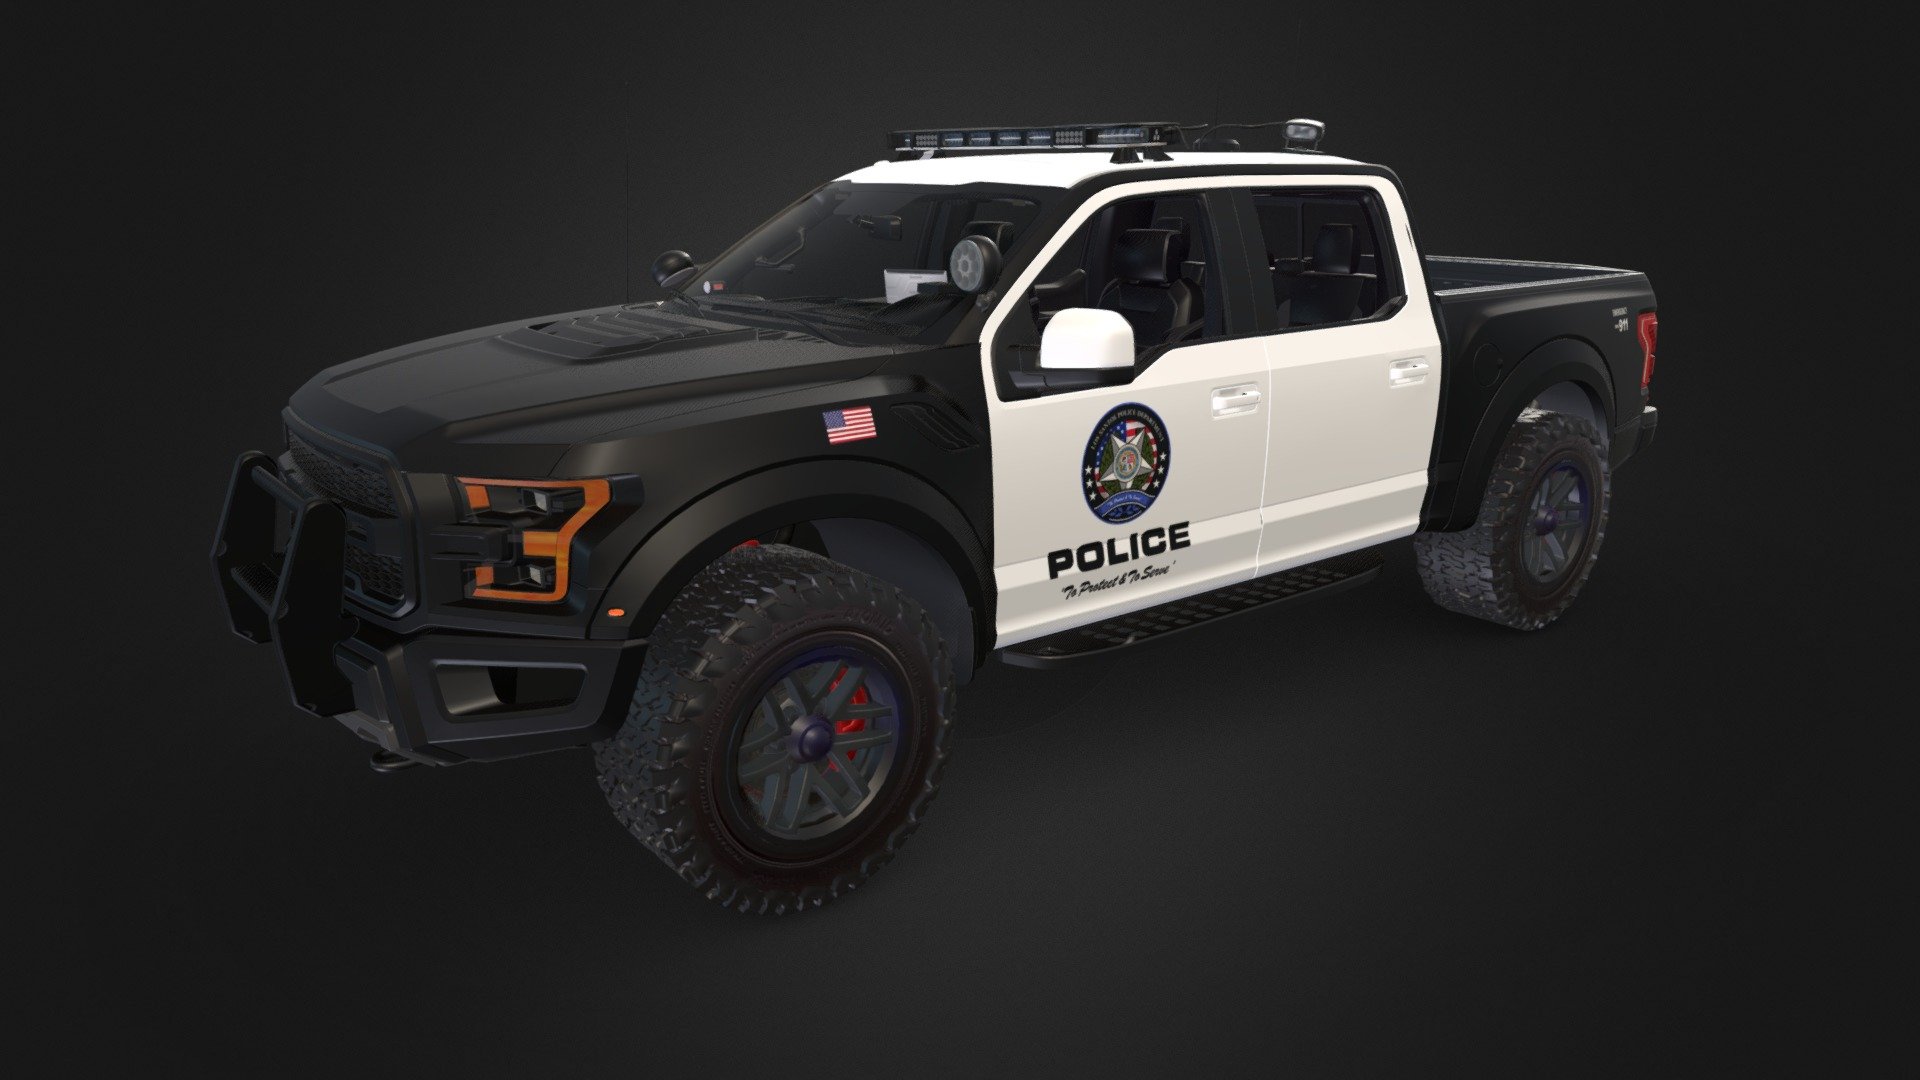 The Ford Raptor Police 3D model is designed as a police vehicle with superior performance and safety features. This vehicle can reach high speeds and provide superior driving experience even in challenging terrain, making it suitable for use in the demanding tasks of police departments.

The exterior design of the model is inspired by the aggressive and sporty look of the Ford Raptor. As a police vehicle, it is equipped with red and blue flashing lights, sirens, and other emergency equipment. In addition, the body of the vehicle is adorned with the police department's logo and other identifying marks.

The Ford Raptor Police 3D model can be used for many different purposes. For example, it can be used in digital animations, advertising films, games, and educational materials. Additionally, it can be used for simulations of real-life police vehicles.
.
I have released my model for free due to some texture errors. Please feel free to share your thoughts and comments about this model - Police Ford Raptor - Download Free 3D model by Cyruxies 3d model